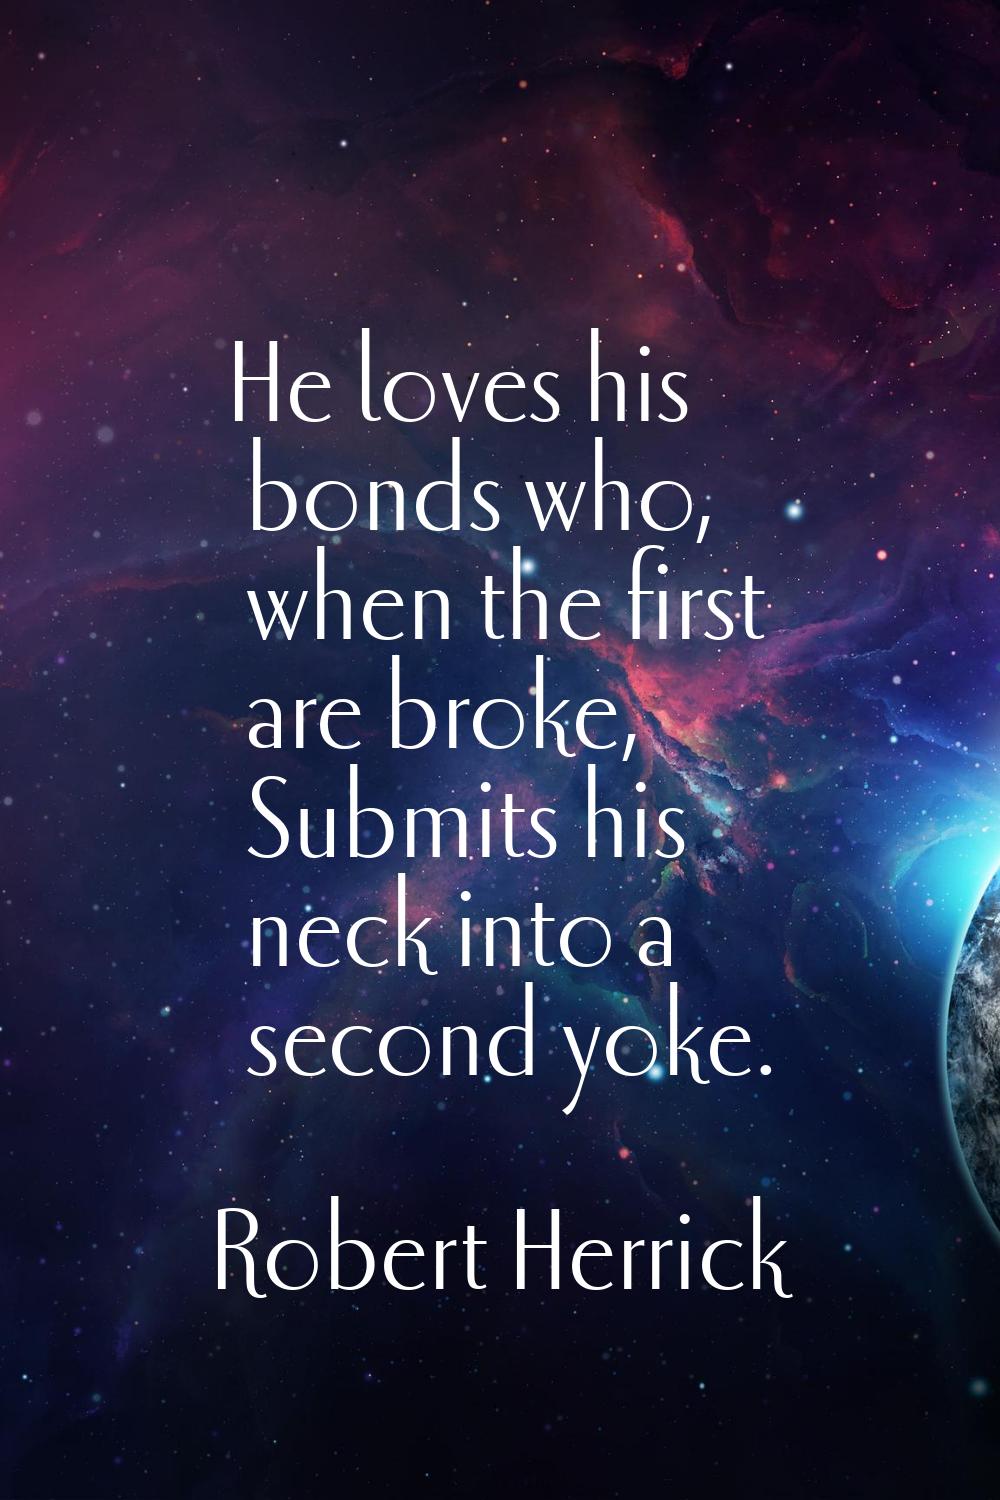 He loves his bonds who, when the first are broke, Submits his neck into a second yoke.